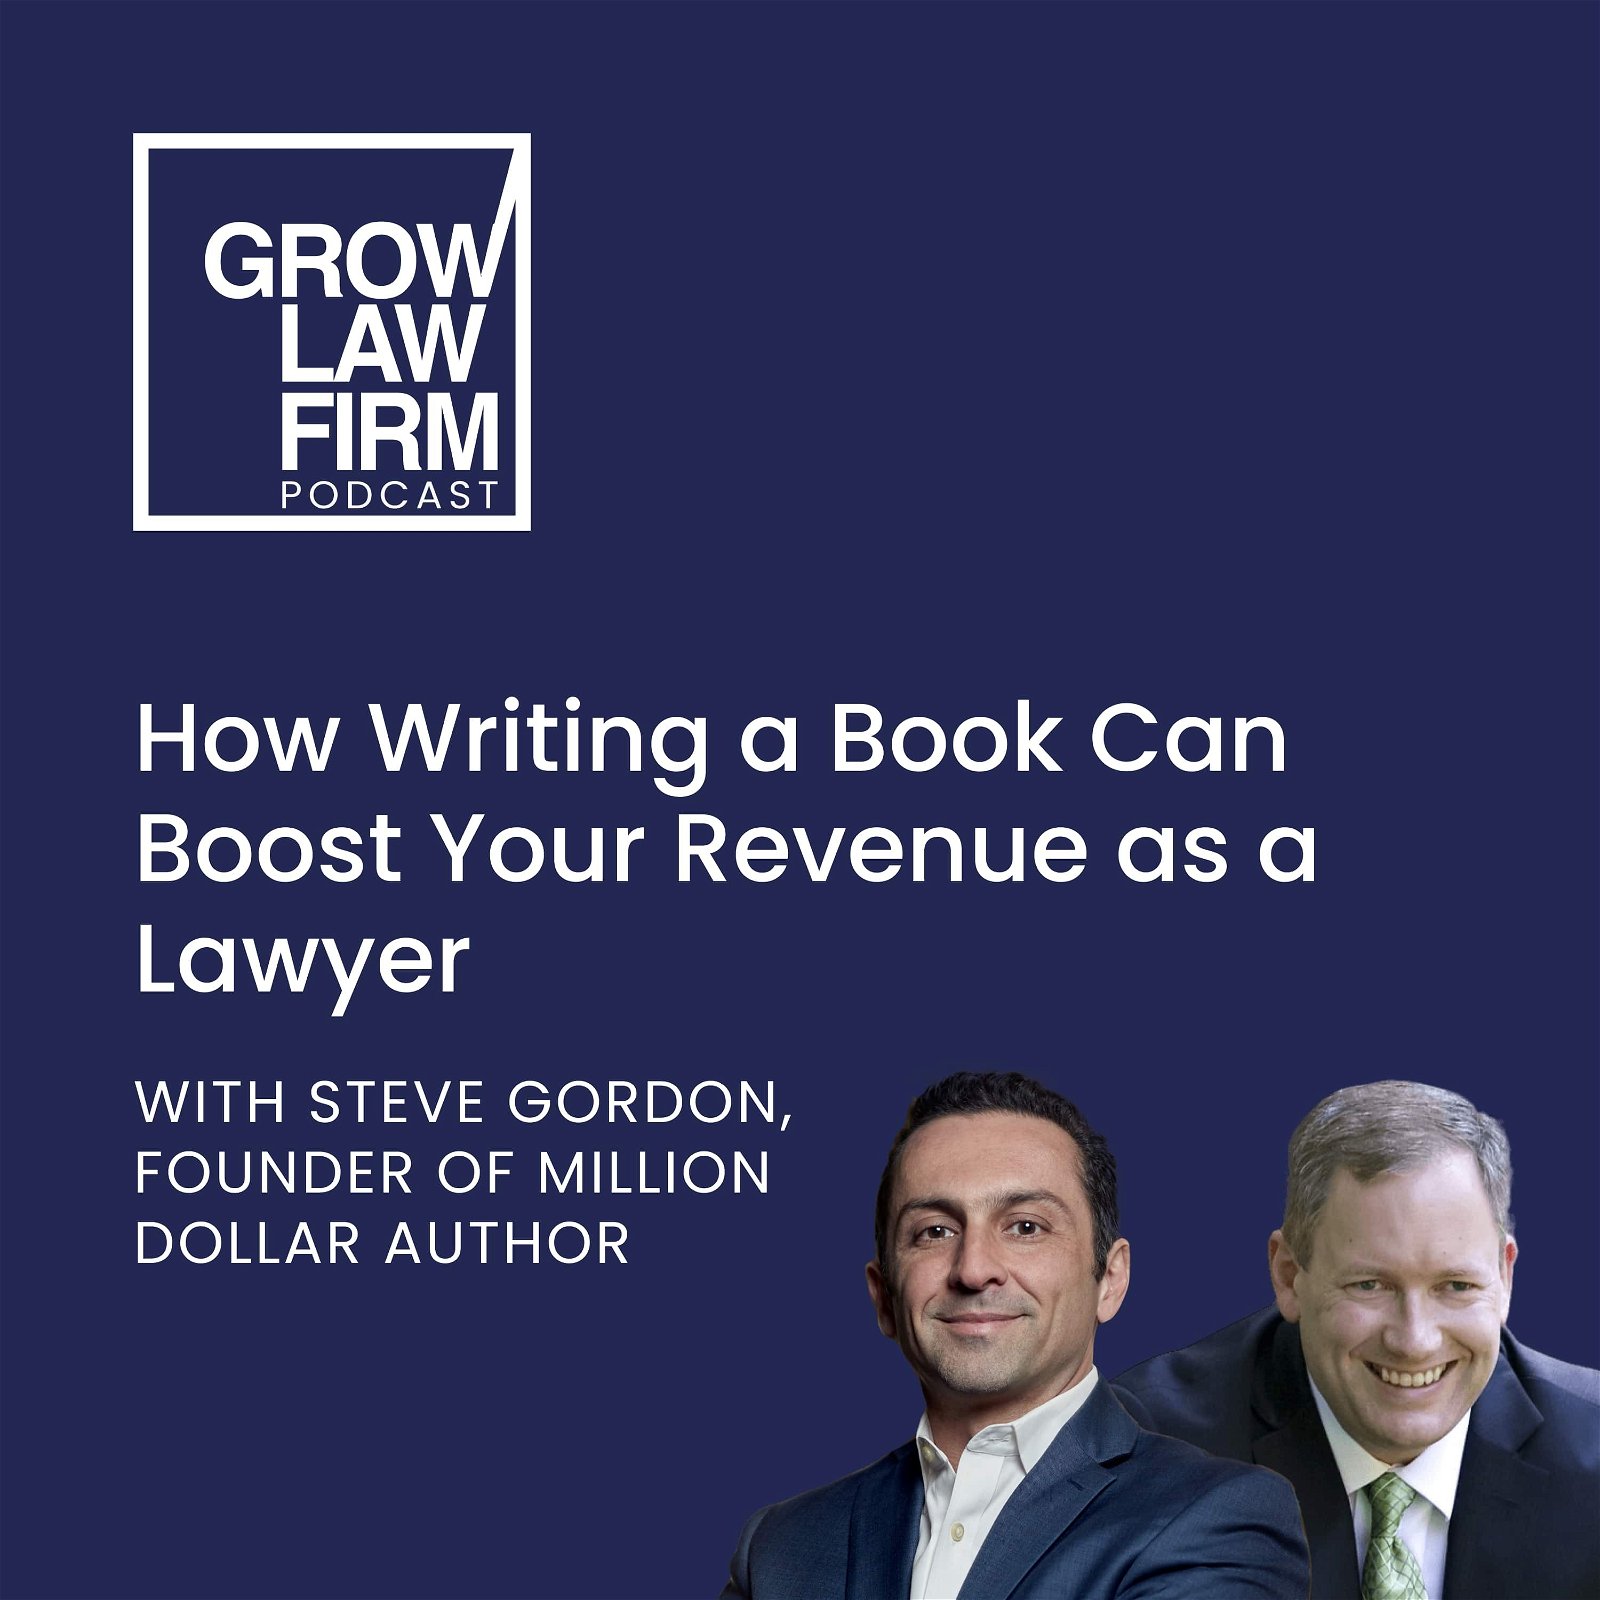 How Writing a Book Can Boost Your Revenue as a Lawyer with Steve Gordon, Founder of Million Dollar Author